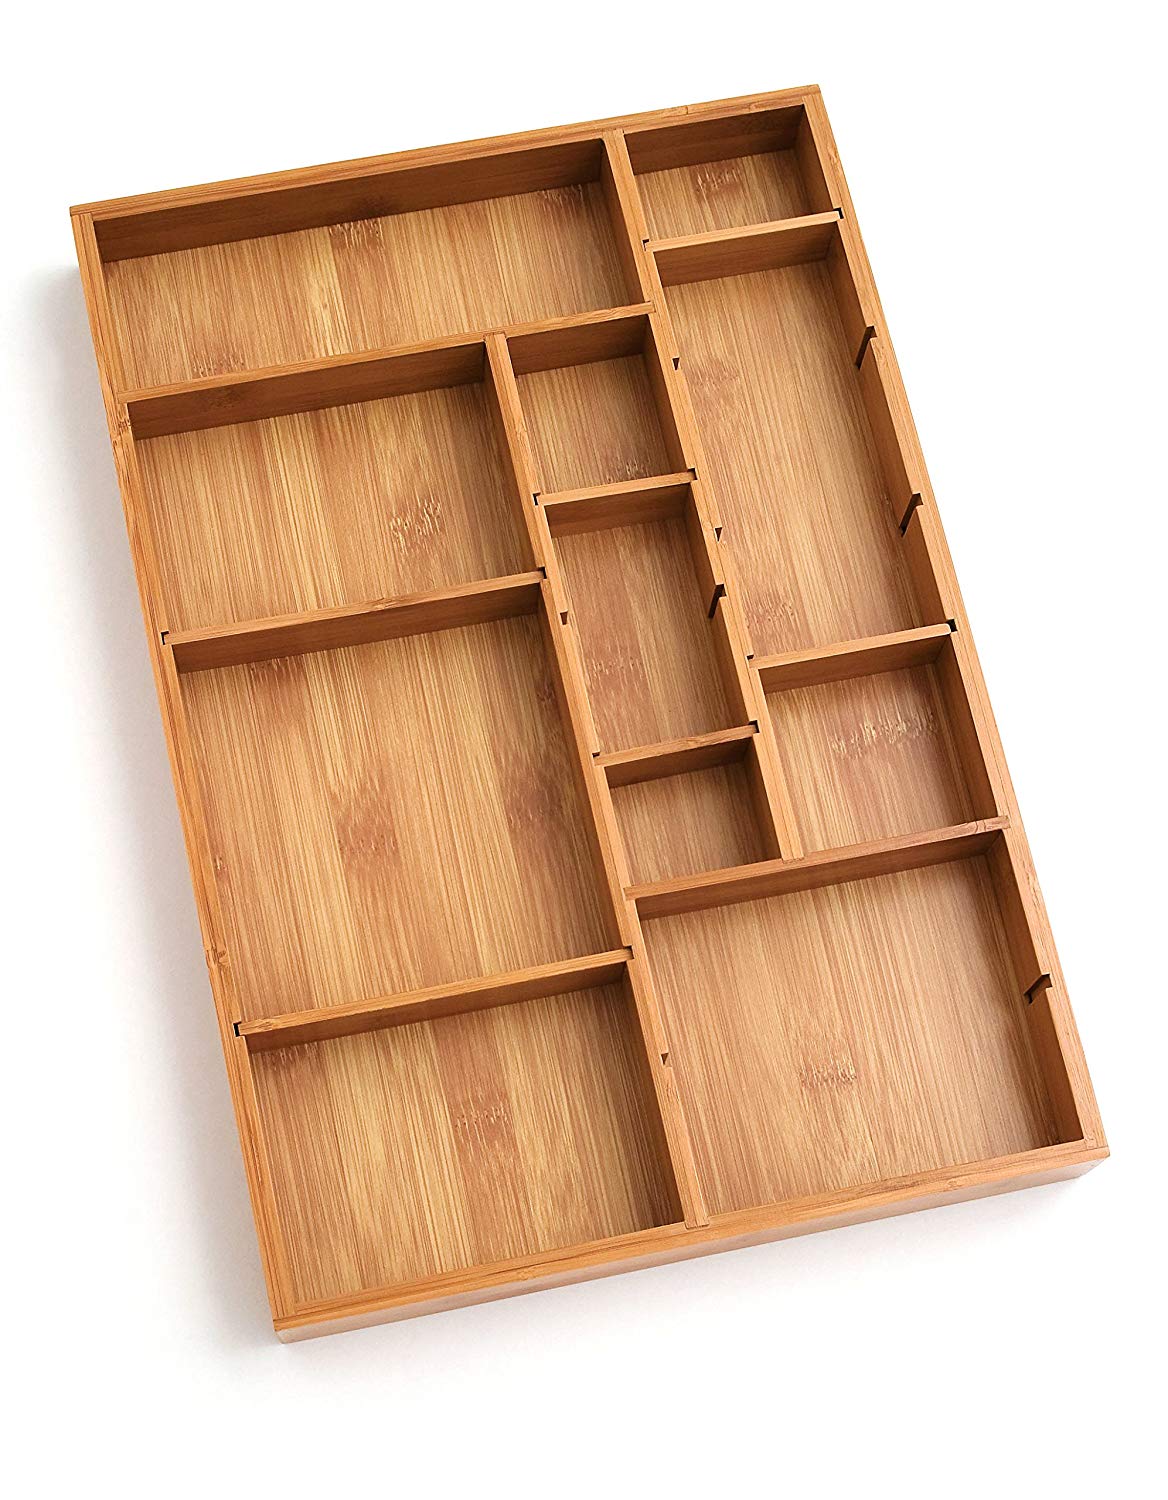 Lipper-International-8397-Bamboo-Wood-Adjustable-Drawer-Organizer-with-6-Removable-Dividers